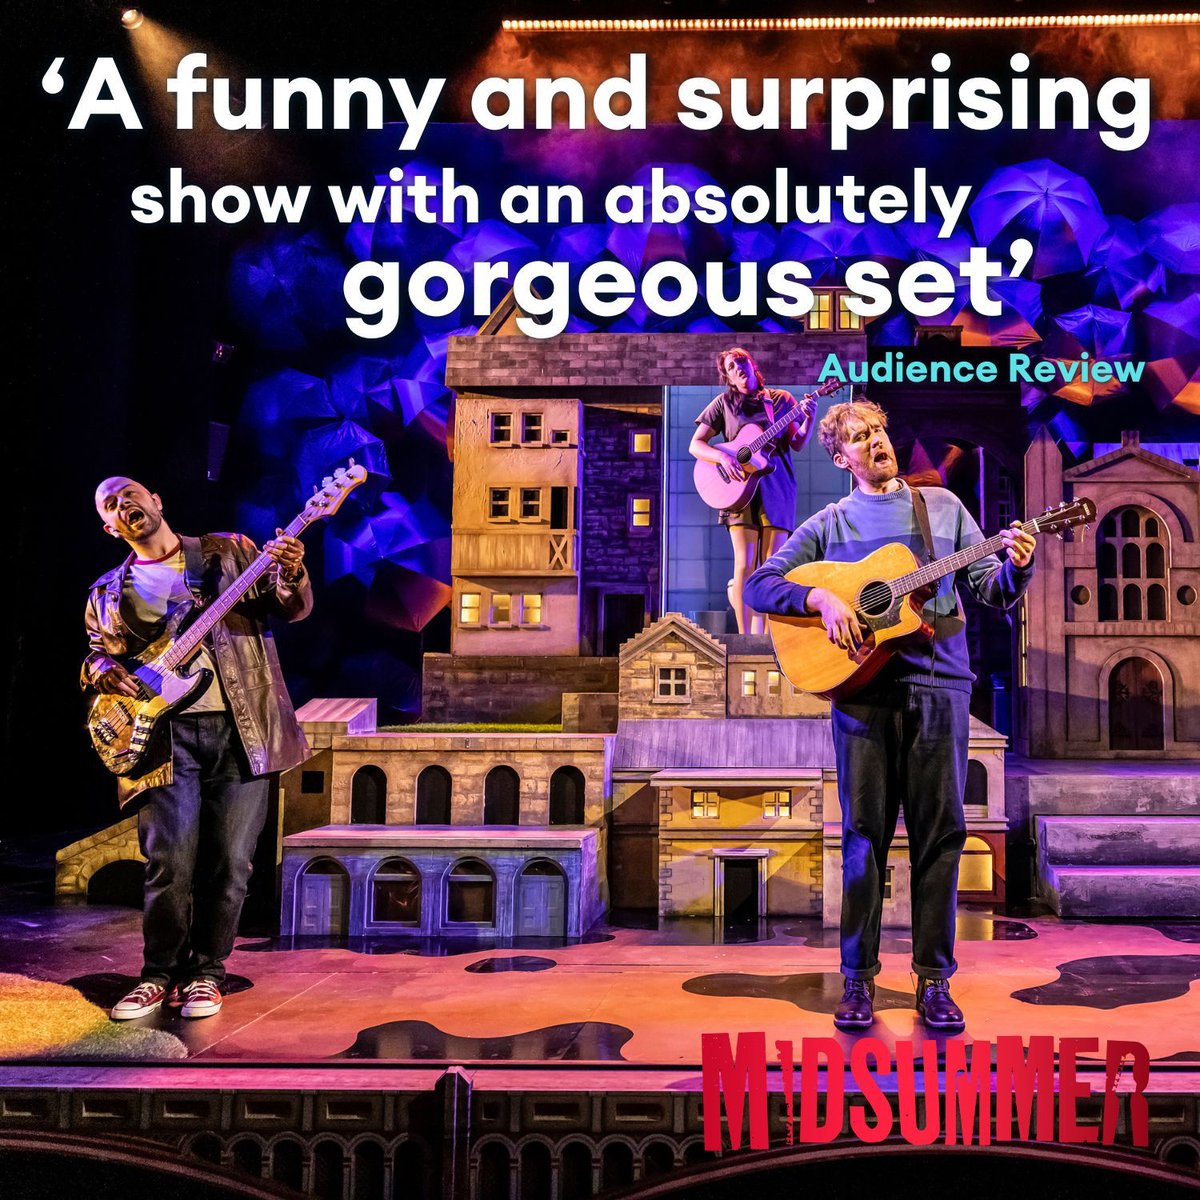 ☂ Don't miss #Midsummer, our show that has 'everything' including an 'absolutely gorgeous set!' Catch our incredible bunch of actor musicians in this beautiful rom-com before Sat 18 May! 🎸

Tickets: buff.ly/4bocBF8